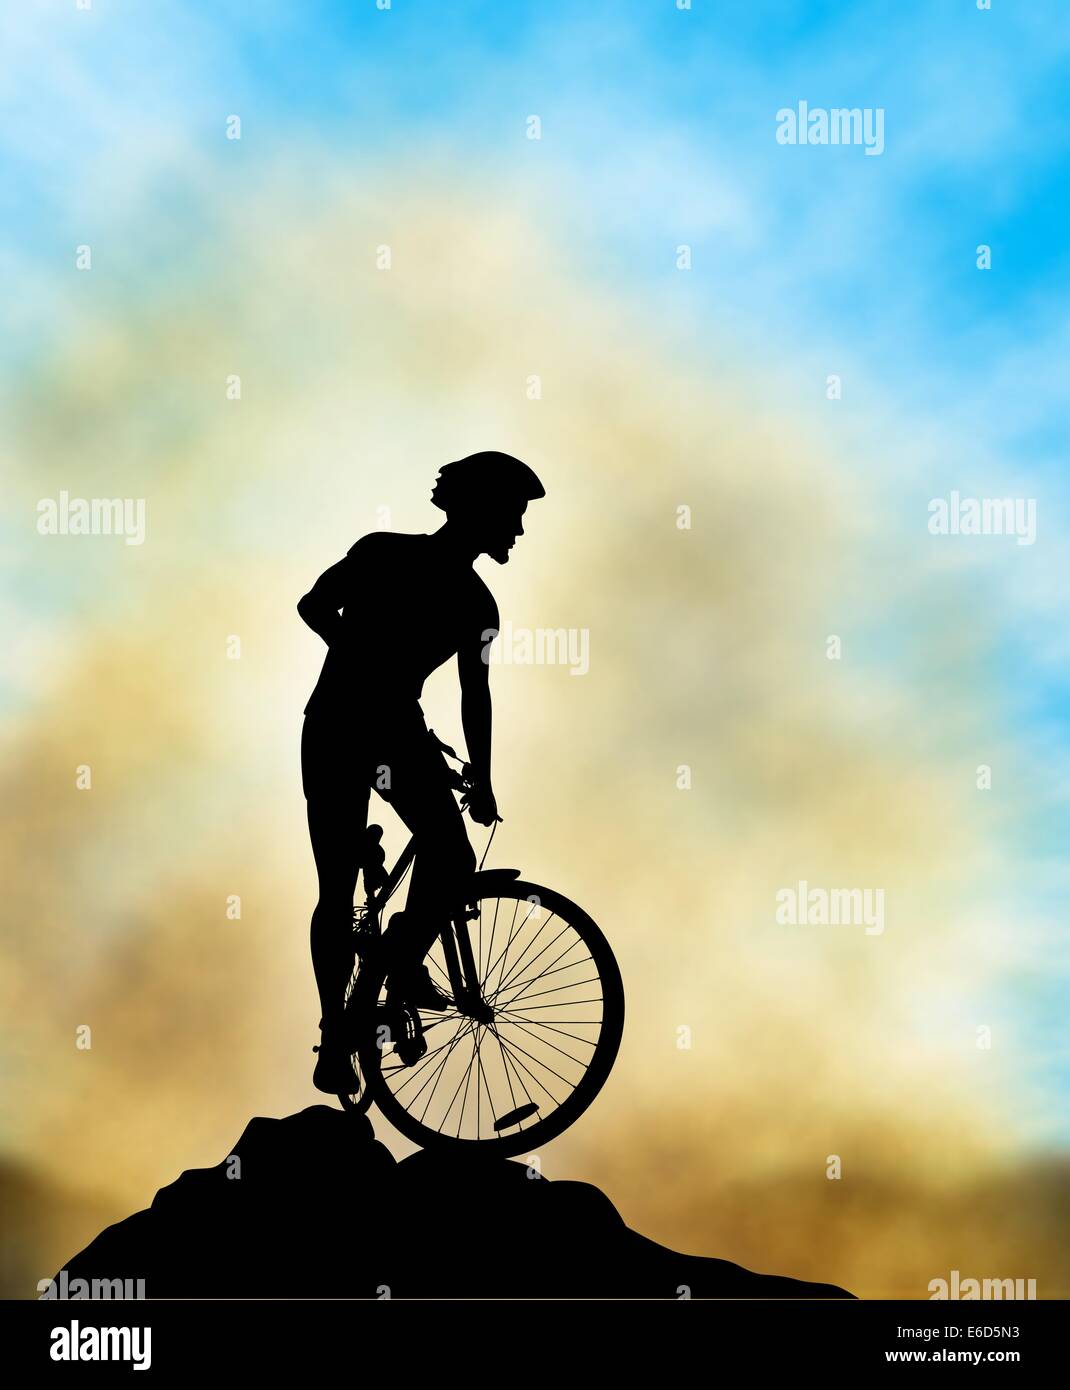 Editable vector illustration of a mountain biker silhouette high on a ridge with background sky and mist made using a gradient m Stock Vector